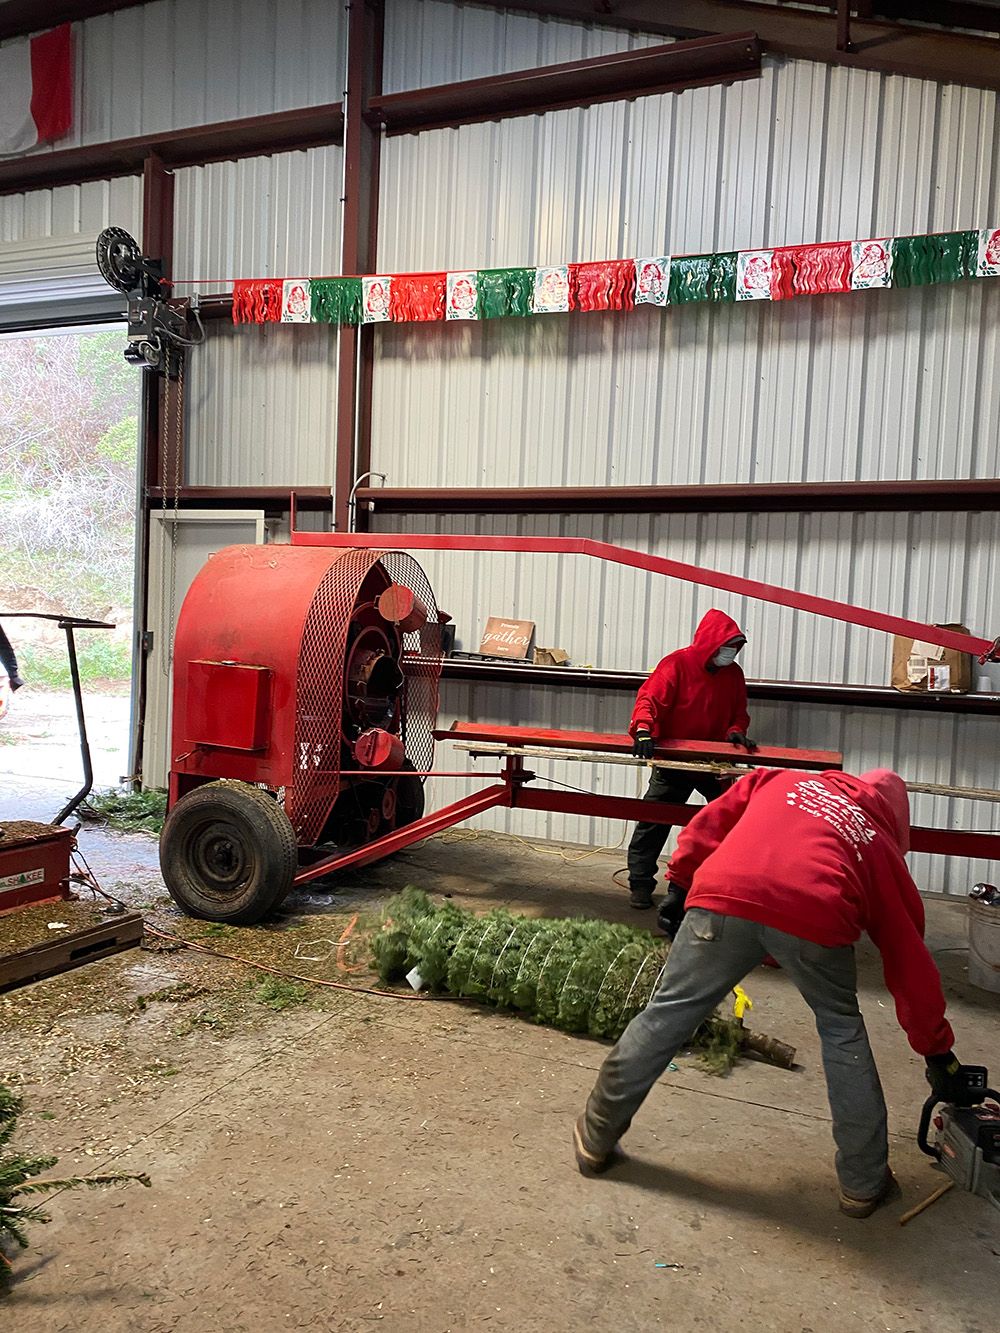 workers in red sweatshirts preparing to hoise a tree into the netting machine